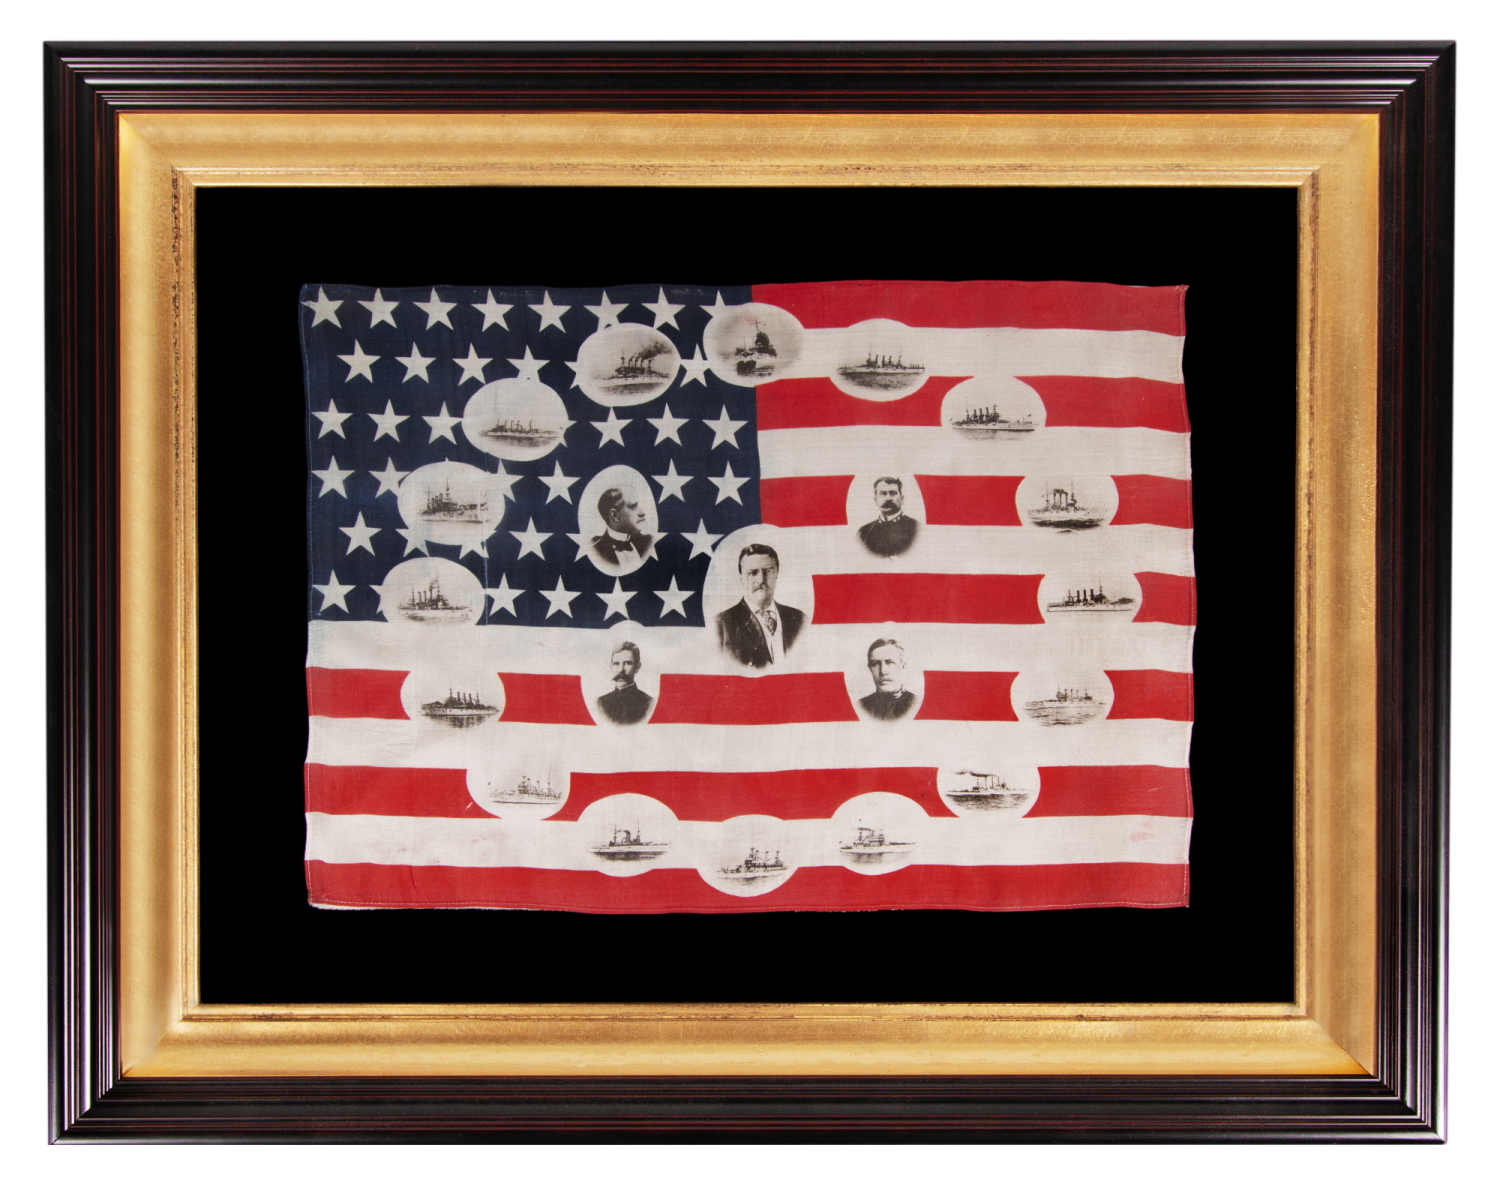 RARE & BEAUTIFUL AMERICAN PARADE FLAG WITH IMAGES OF TEDDY ROOSEVELT AND HIS GREAT WHITE FLEET, 1907-1909, EX-RICHARD PIERCE COLLECTION